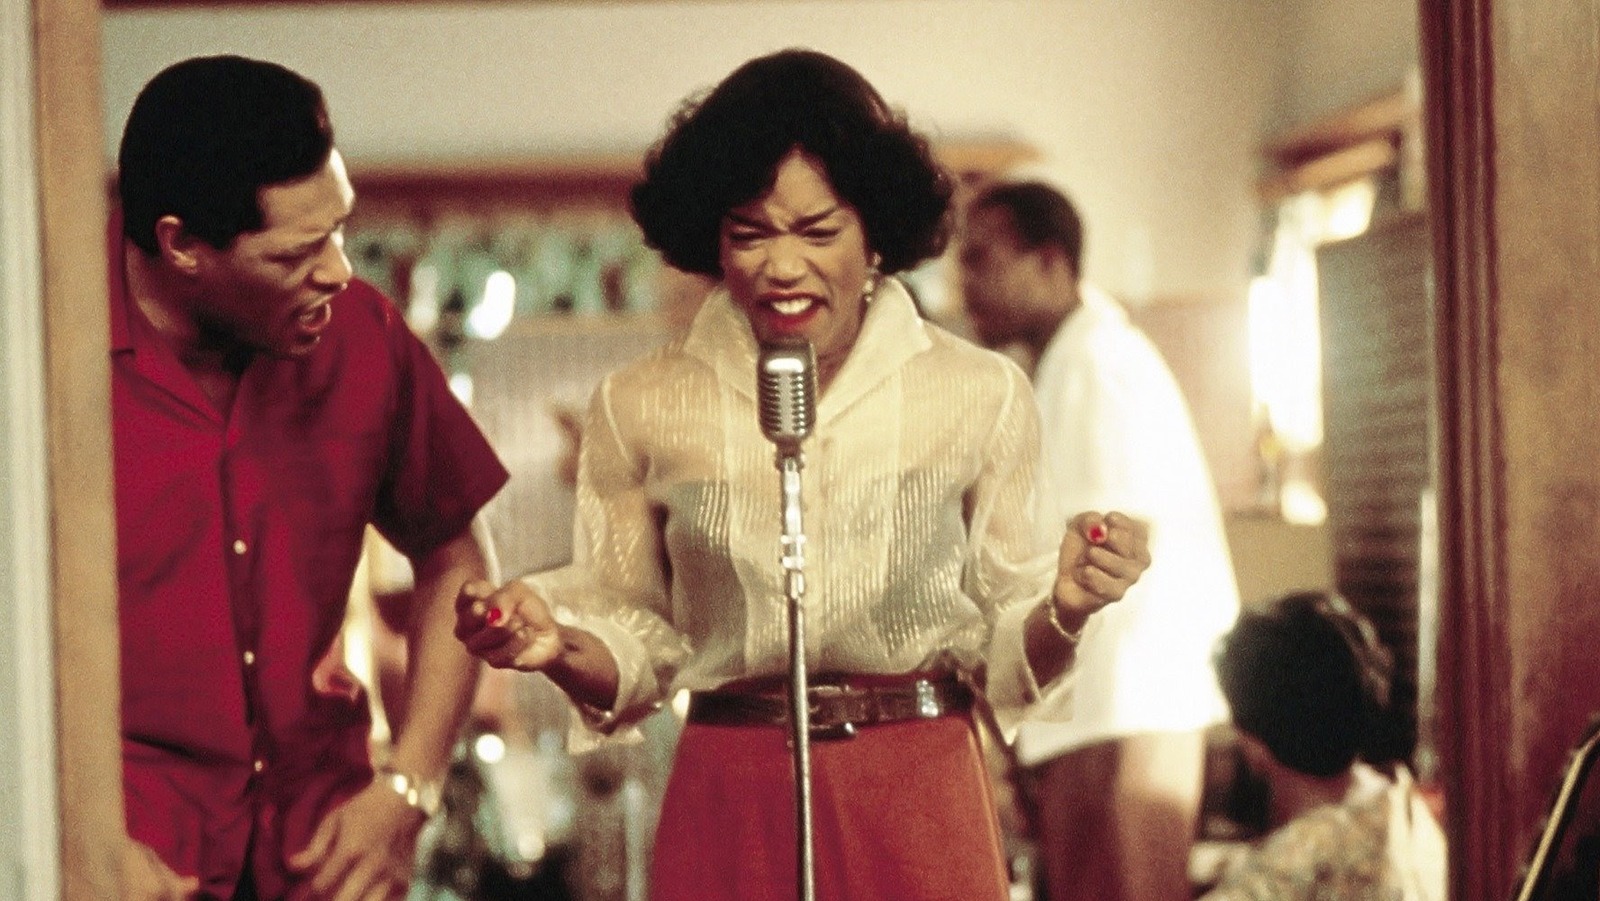 Angela Bassett gave the biopic’s definitive performance as Tina Turner in What’s Love Got To Do With It